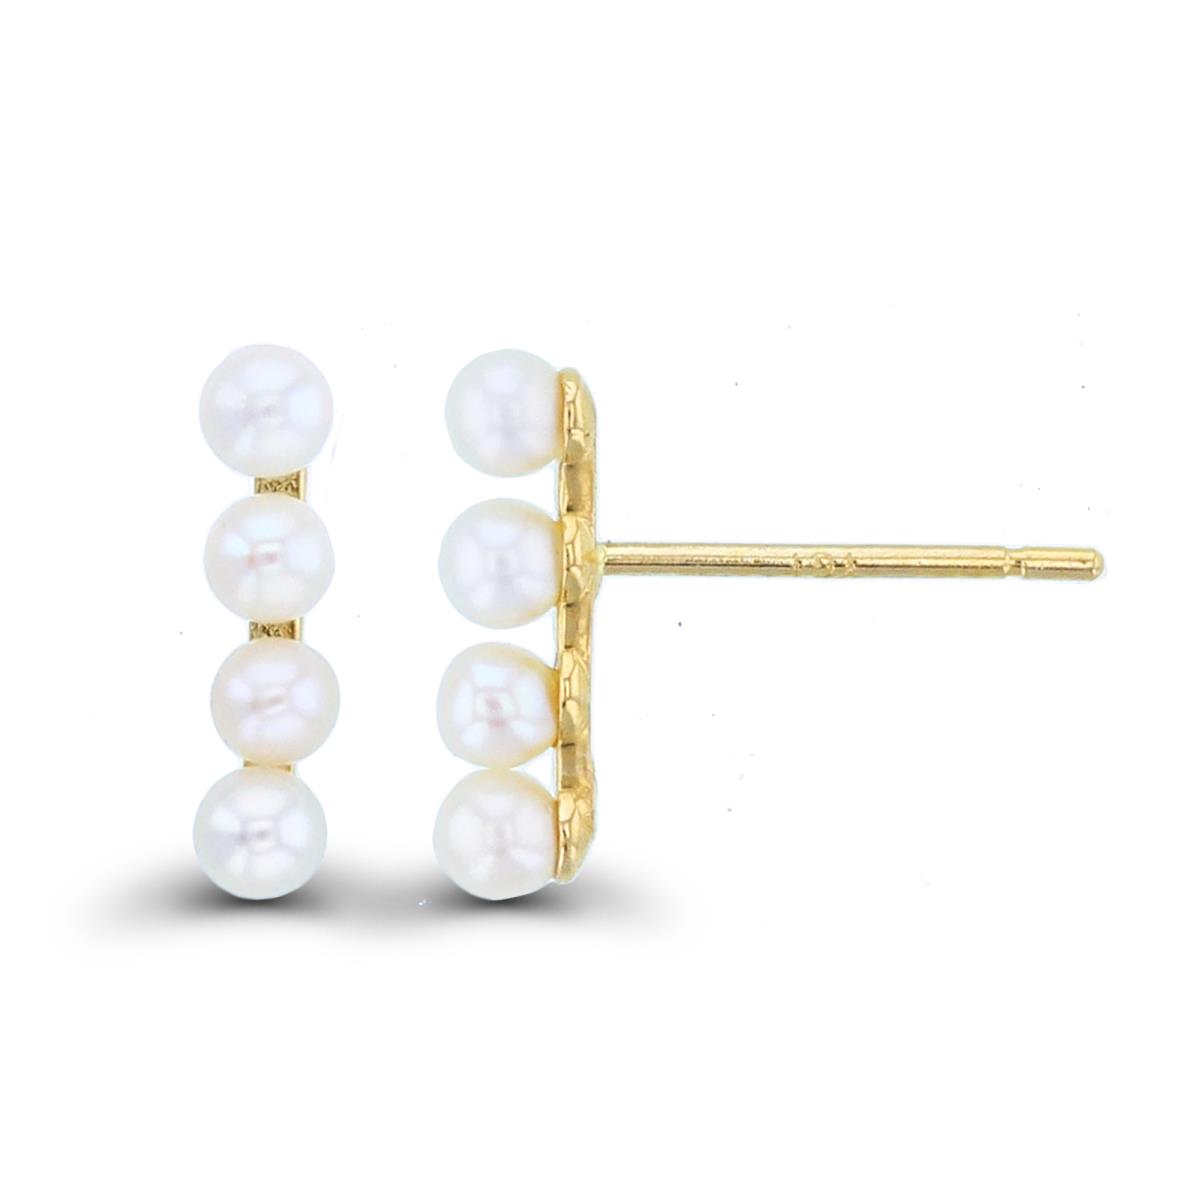 10K Yellow Gold 2mm Rnd Fresh Water Pearls Vertical Row Studs with Silicon Backs